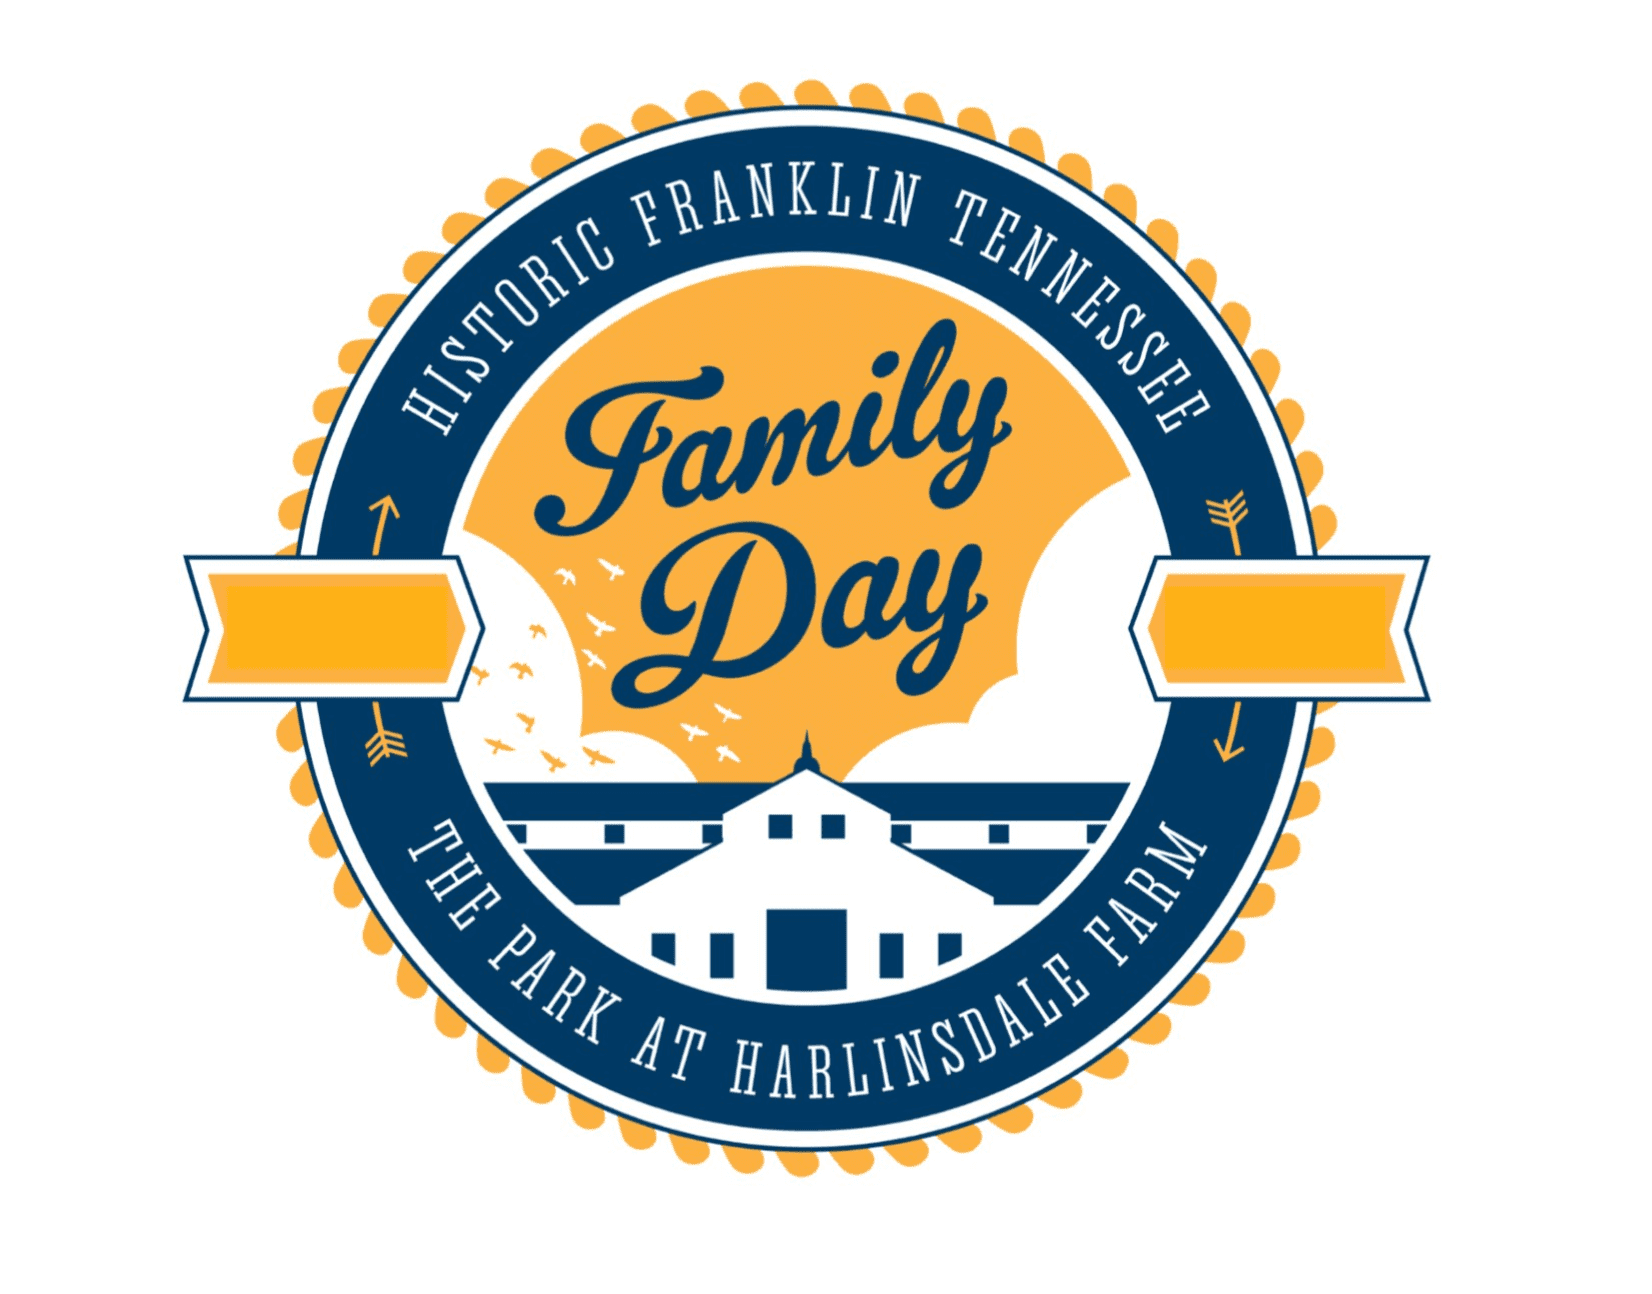 A Franklin, TN family event, Family Day is a free festival in Franklin that is fun for all ages offering family activities like miniature train rides, hay rides, pony rides, a petting zoo, cane pole fishing in the pond, Touch-a-Tractor area, horse related events, food and great music!